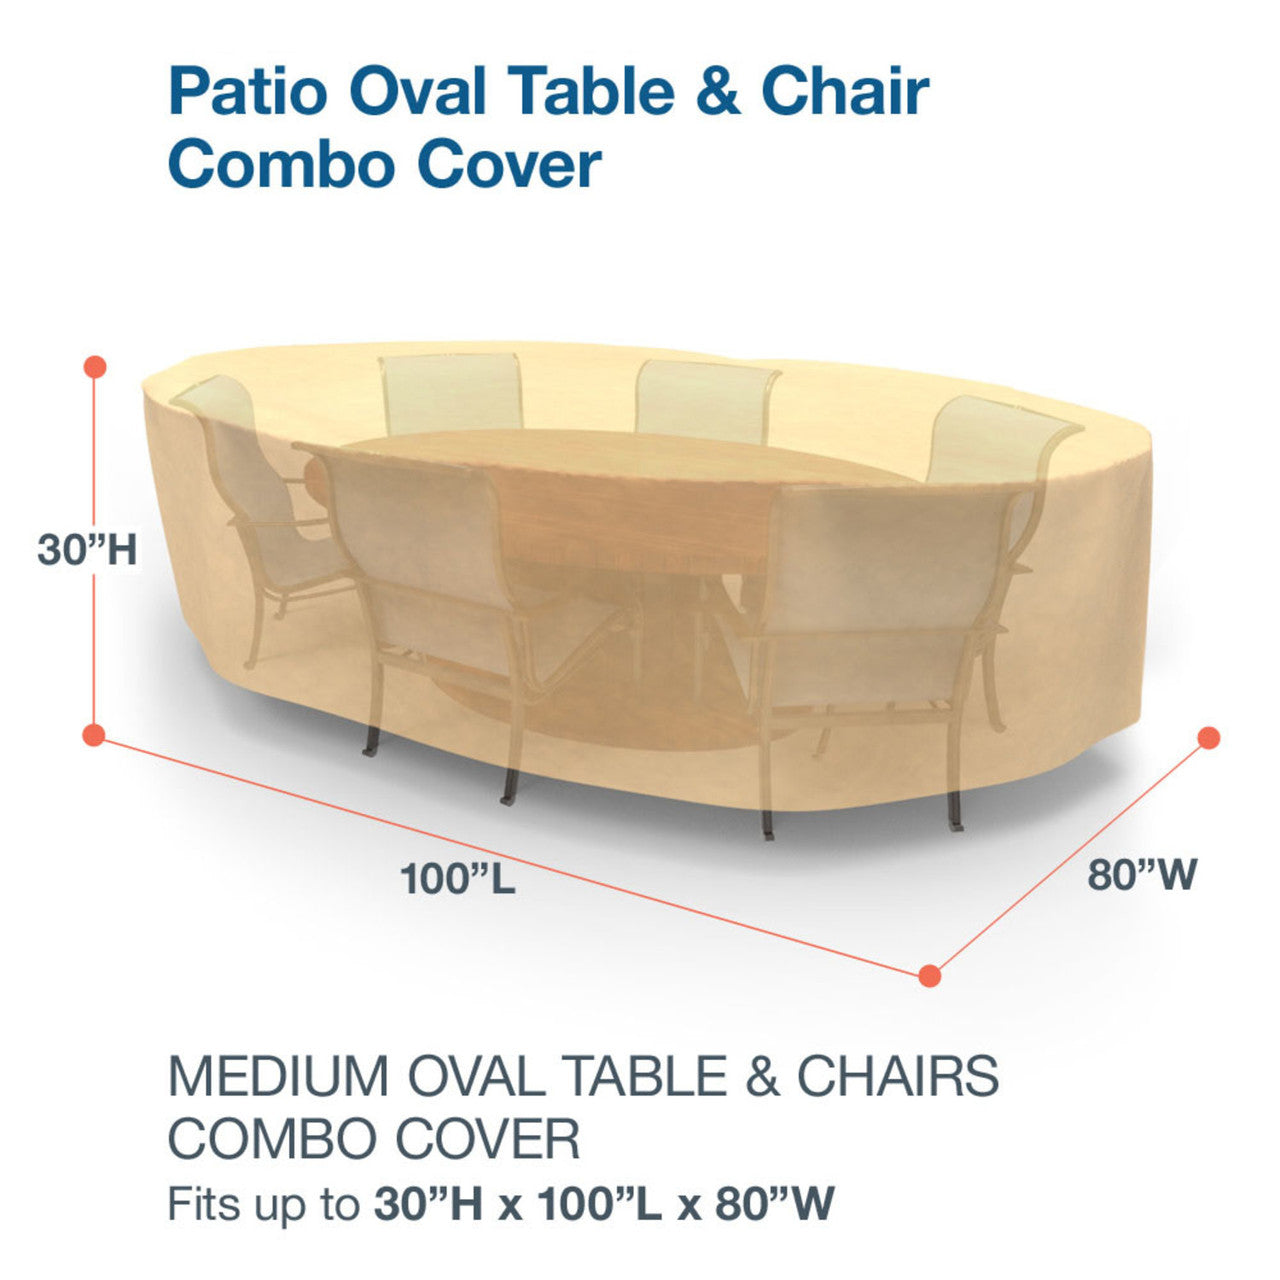 Budge Industries All Seasons Oval Table/Chair Combo Cover